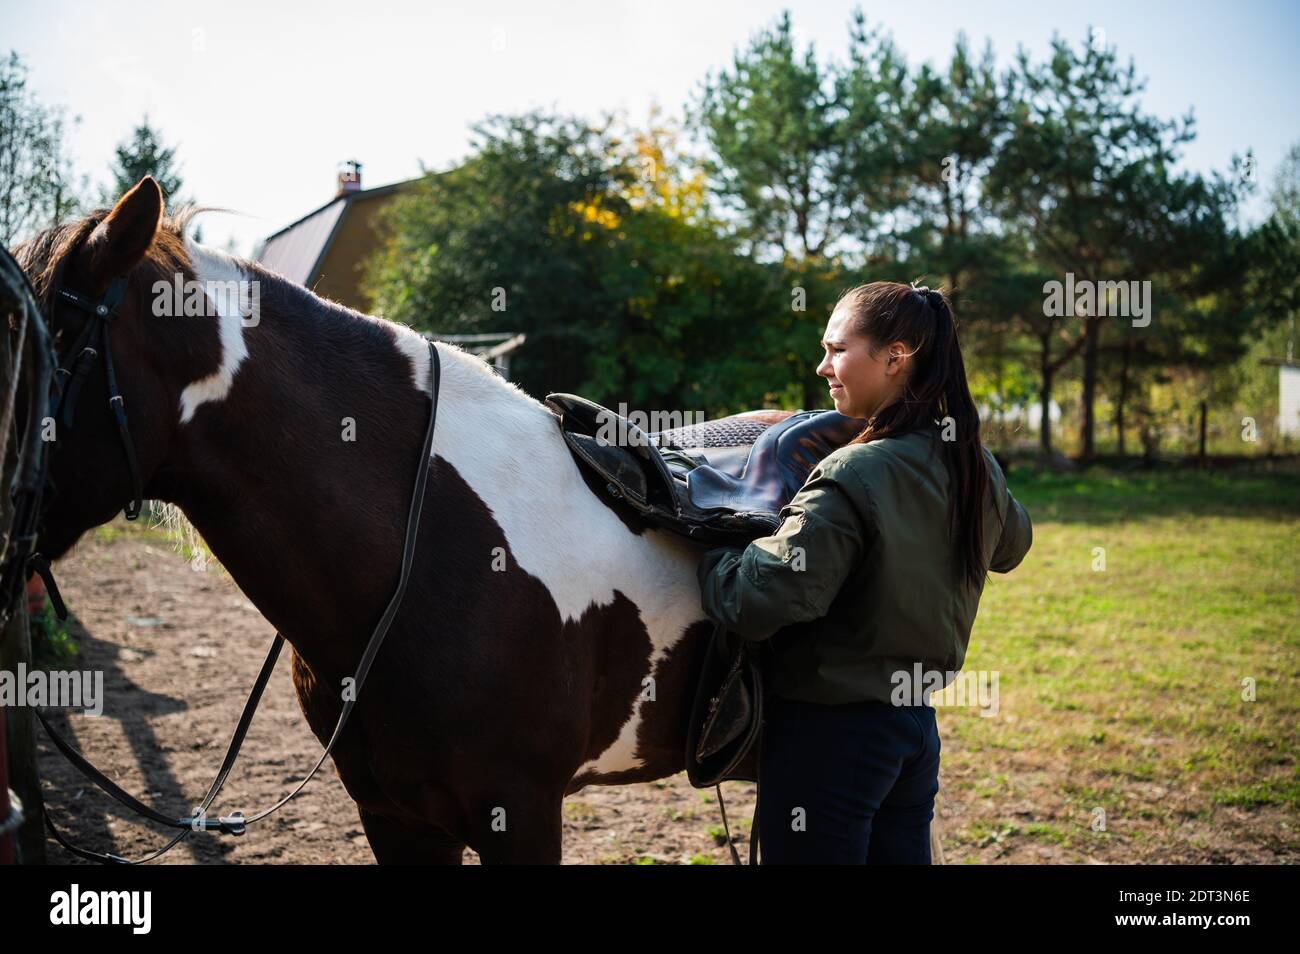 A girl removes a saddle from the back of a horse near a stable on a farm. Stock Photo